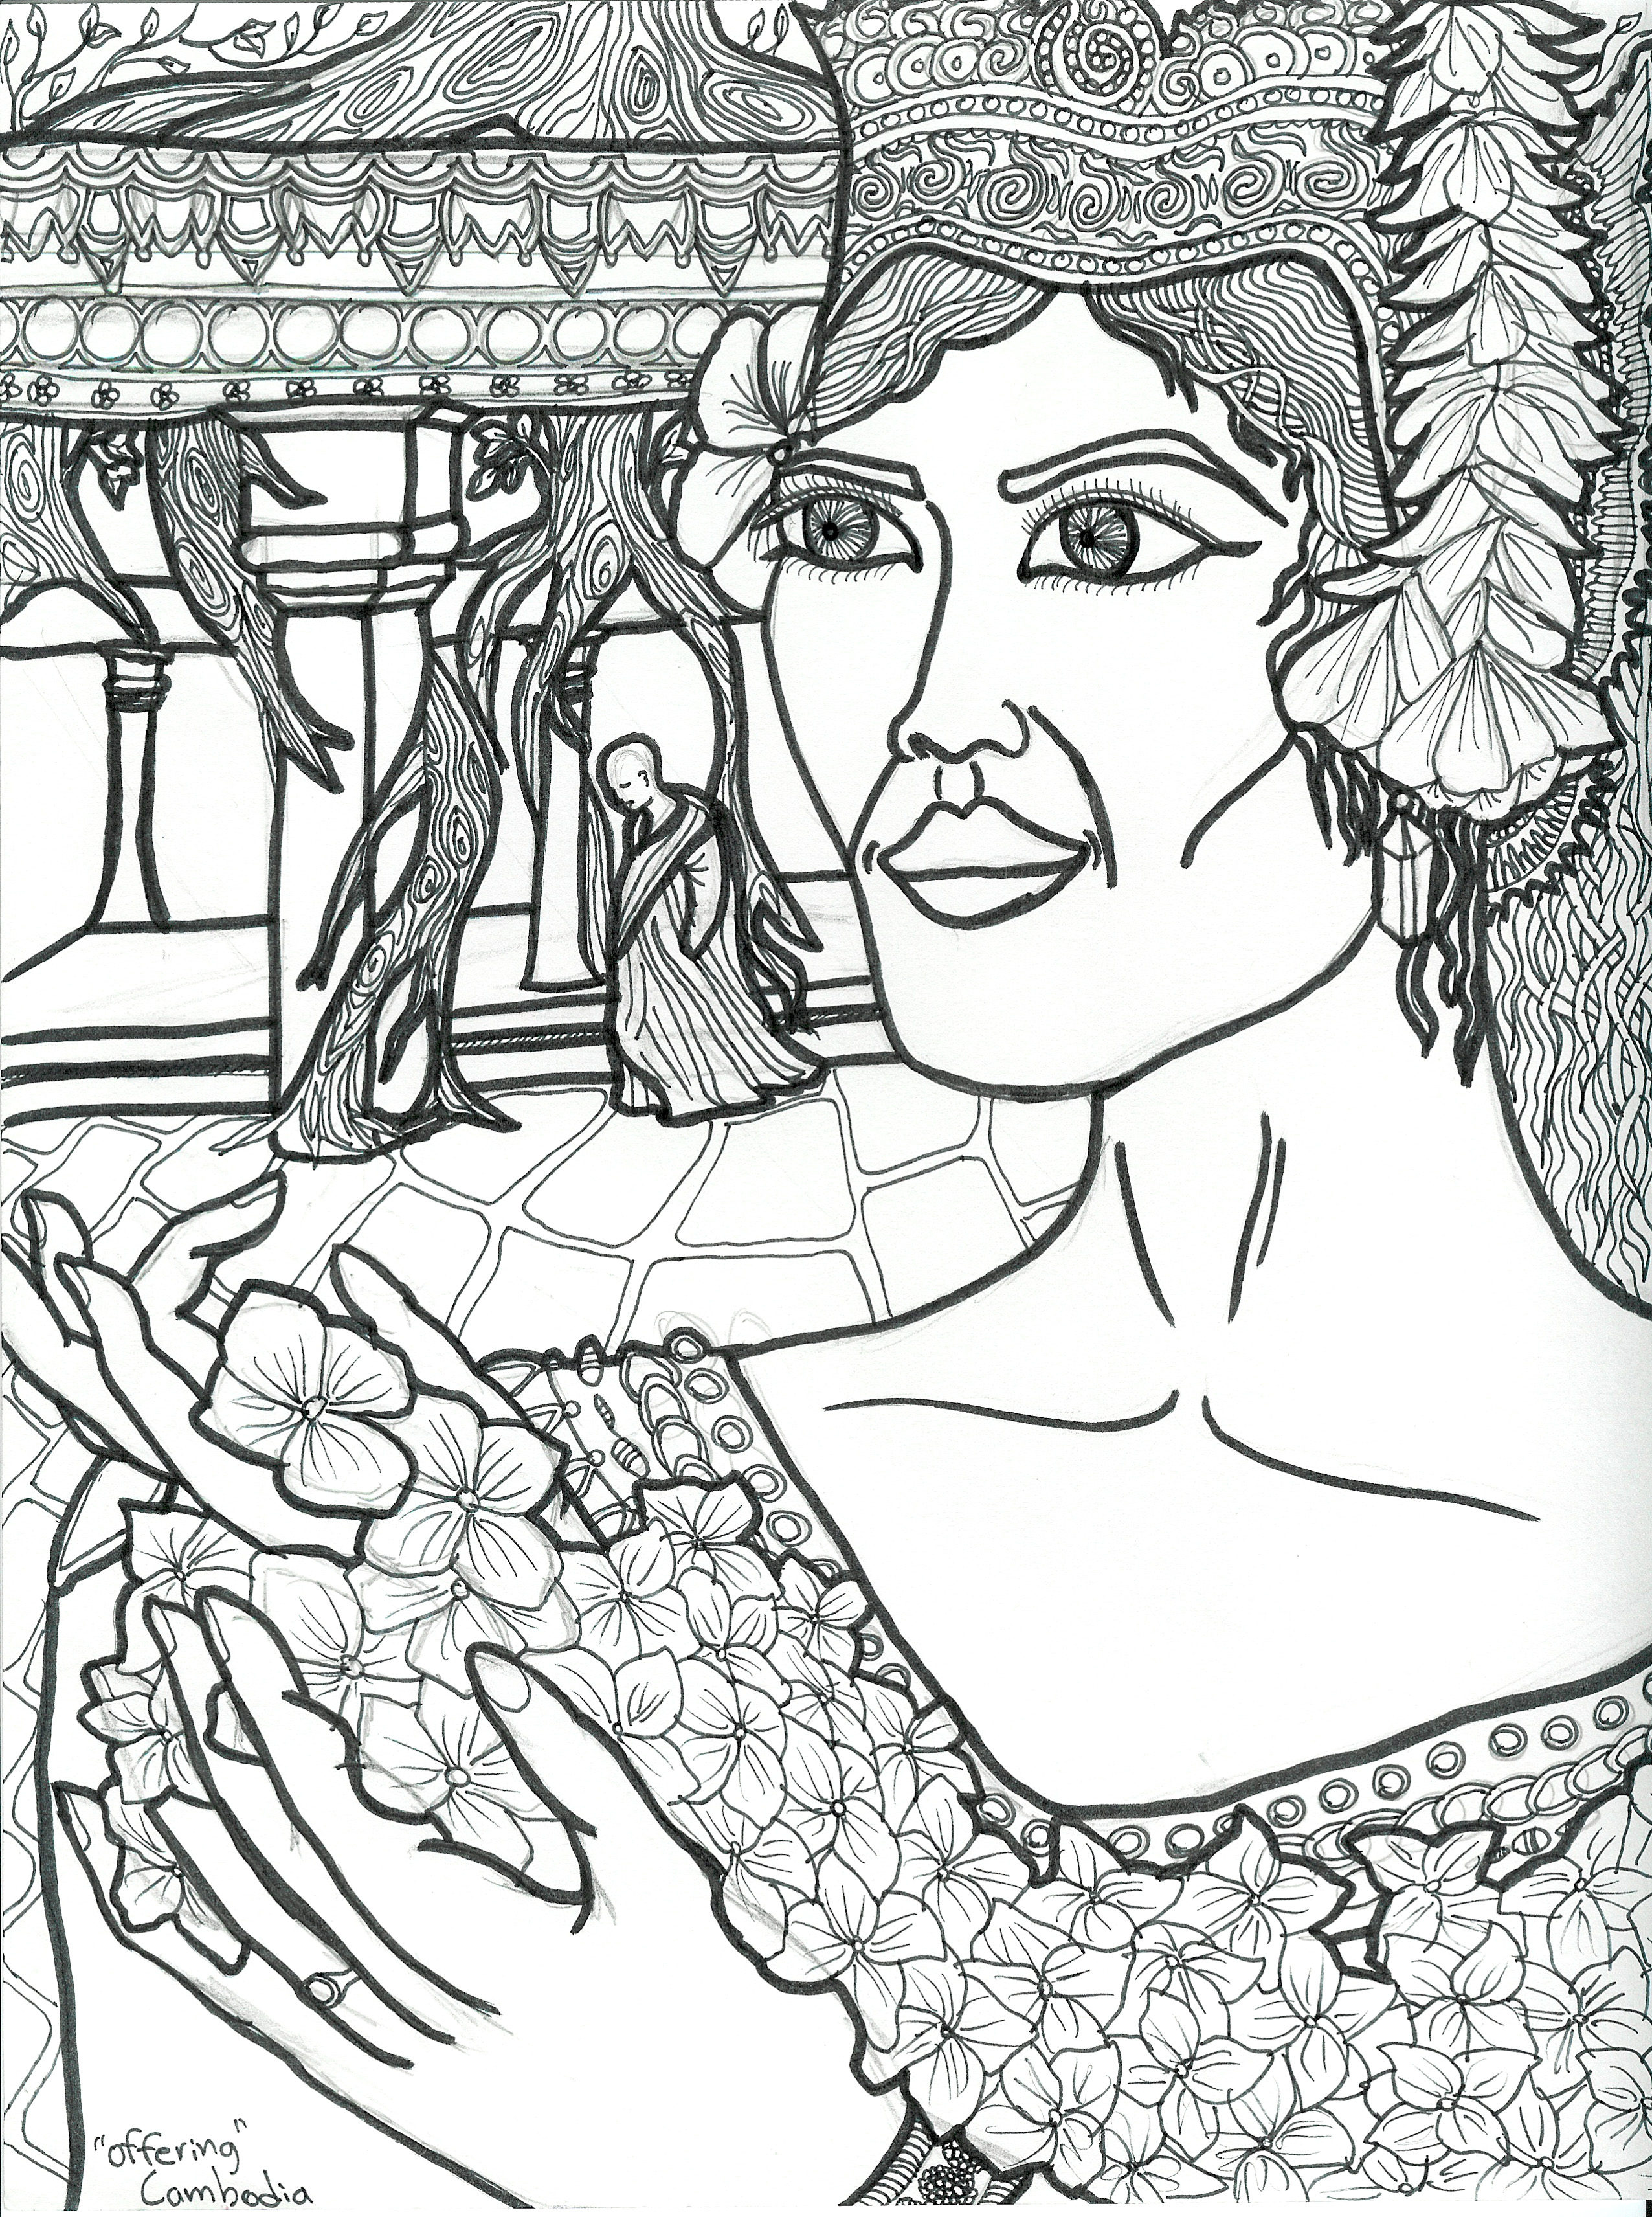 Click here to see the progress of Project Pallet's "Color The World In Peace" Coloring Book! 